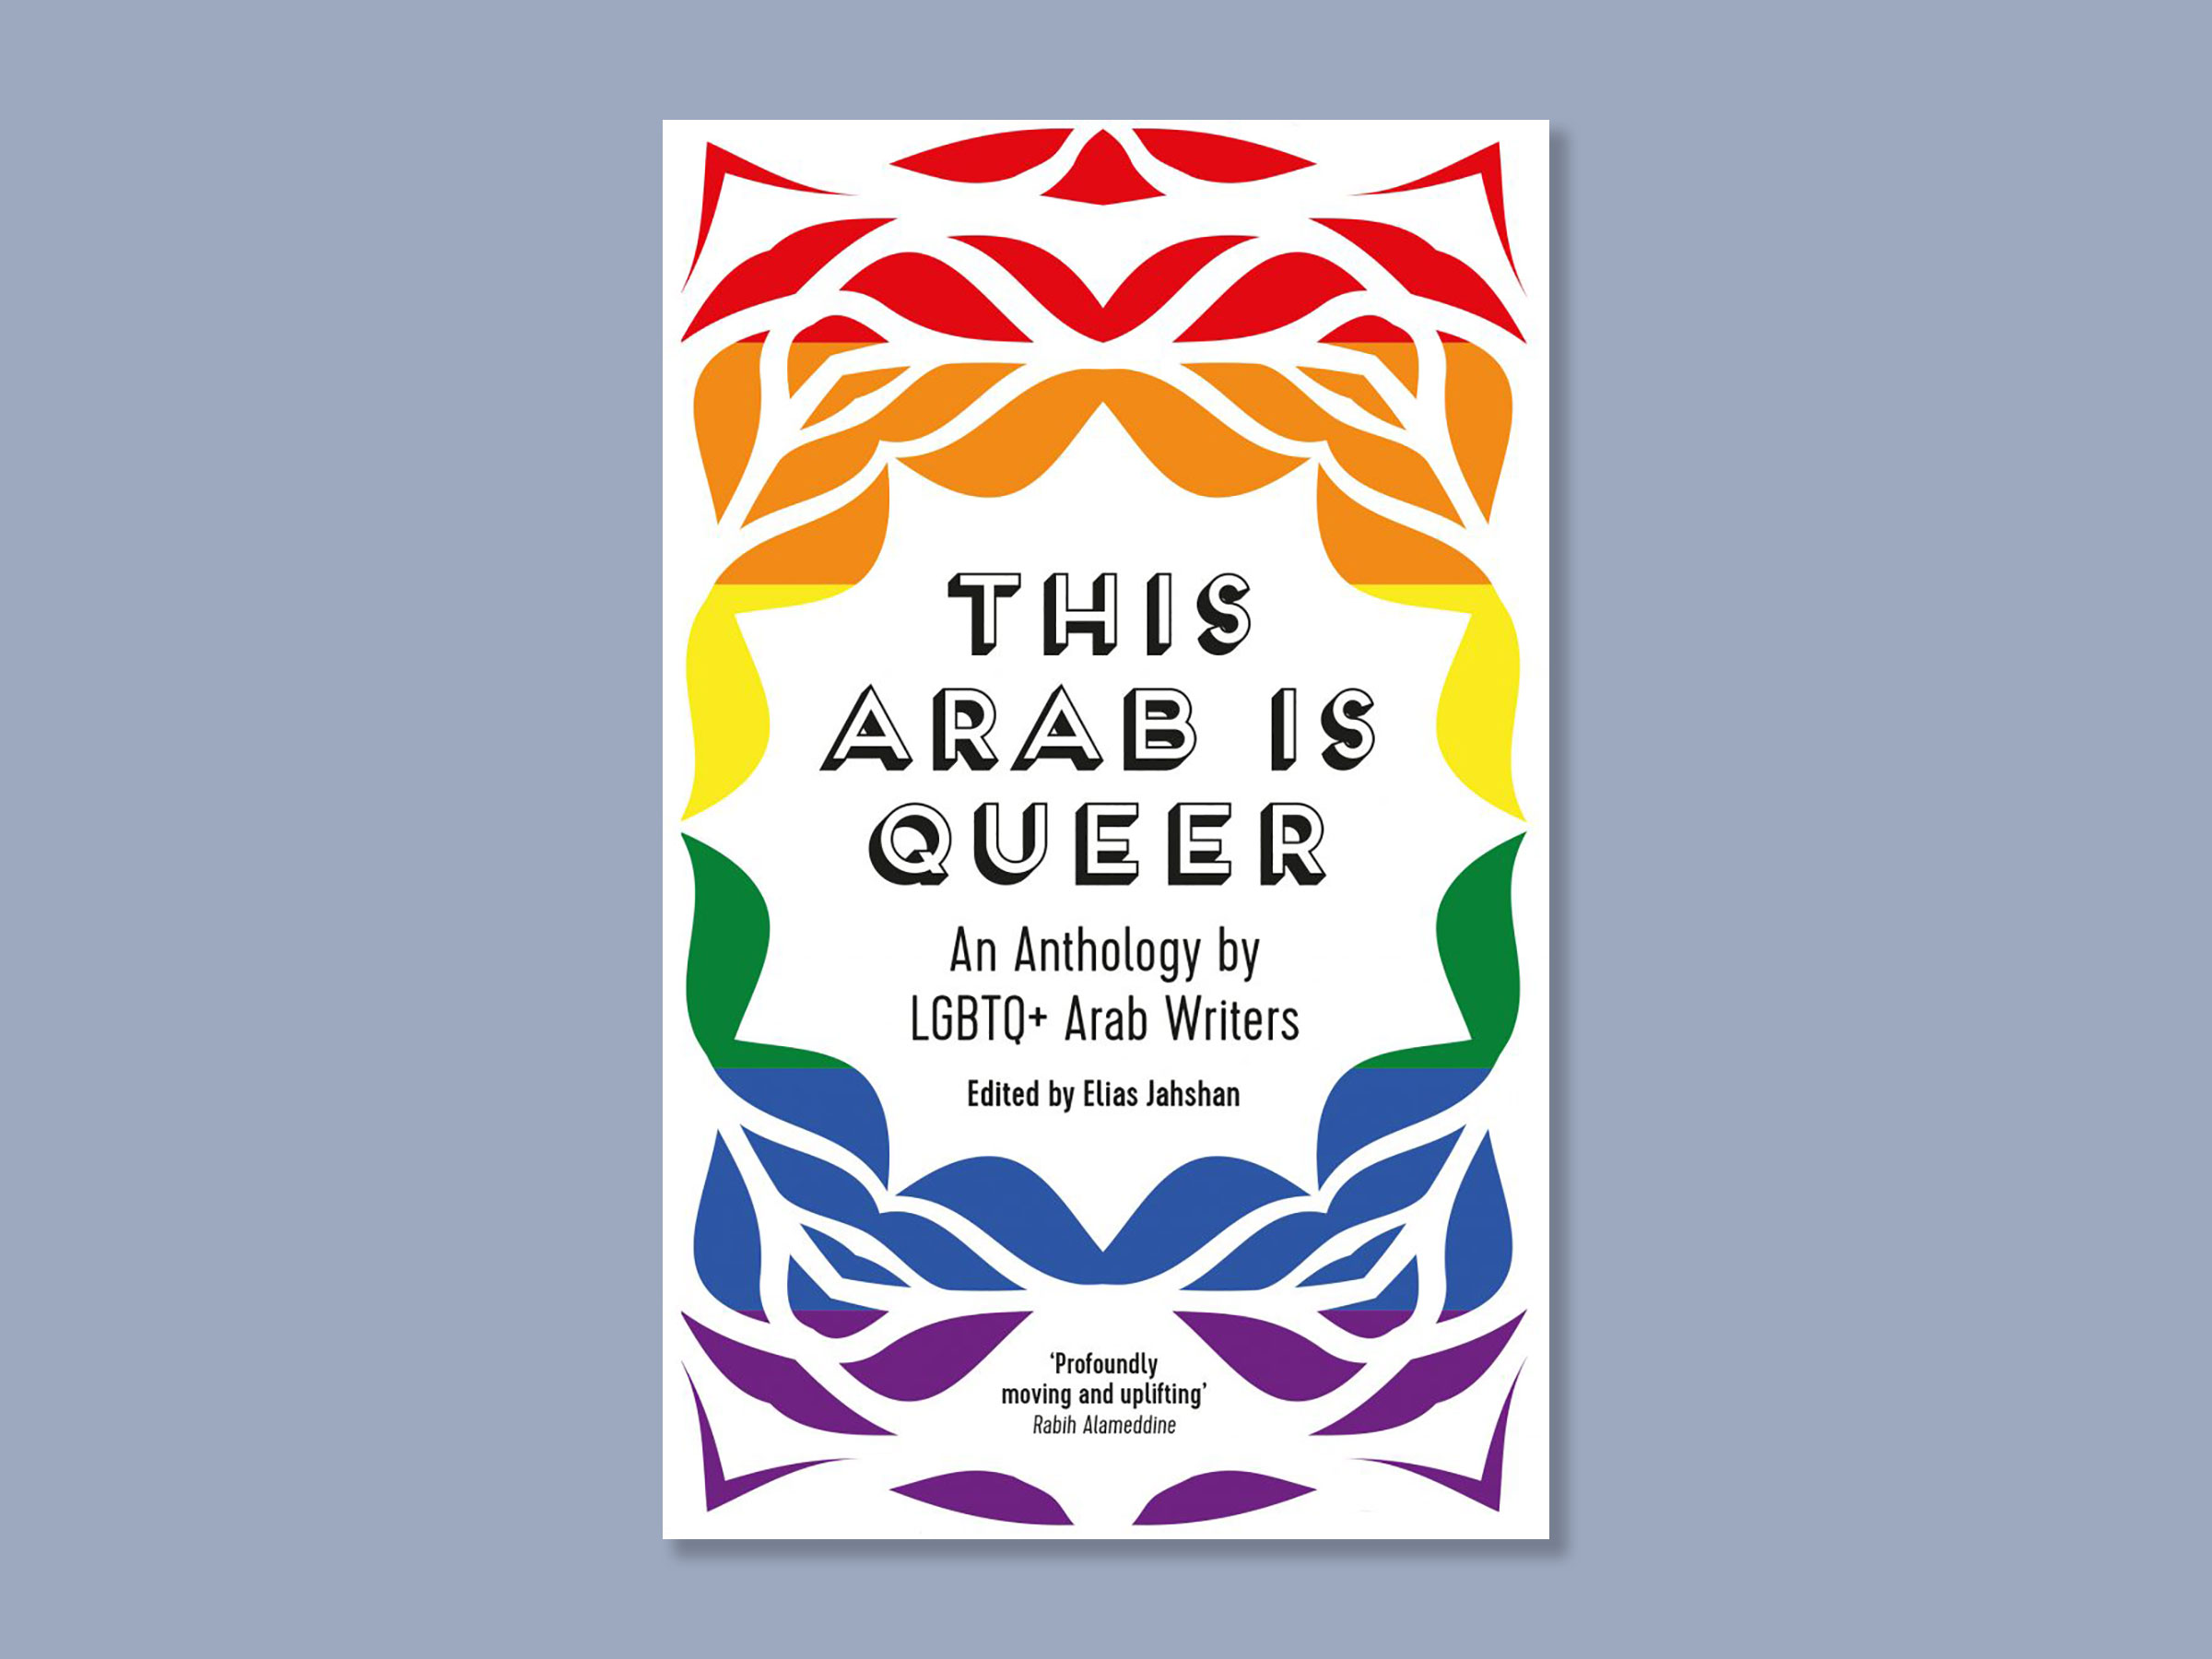 book cover of “This Arab Is Queer: An Anthology by LGBTQ+ Arab Writers,” edited by Elias Jahshan